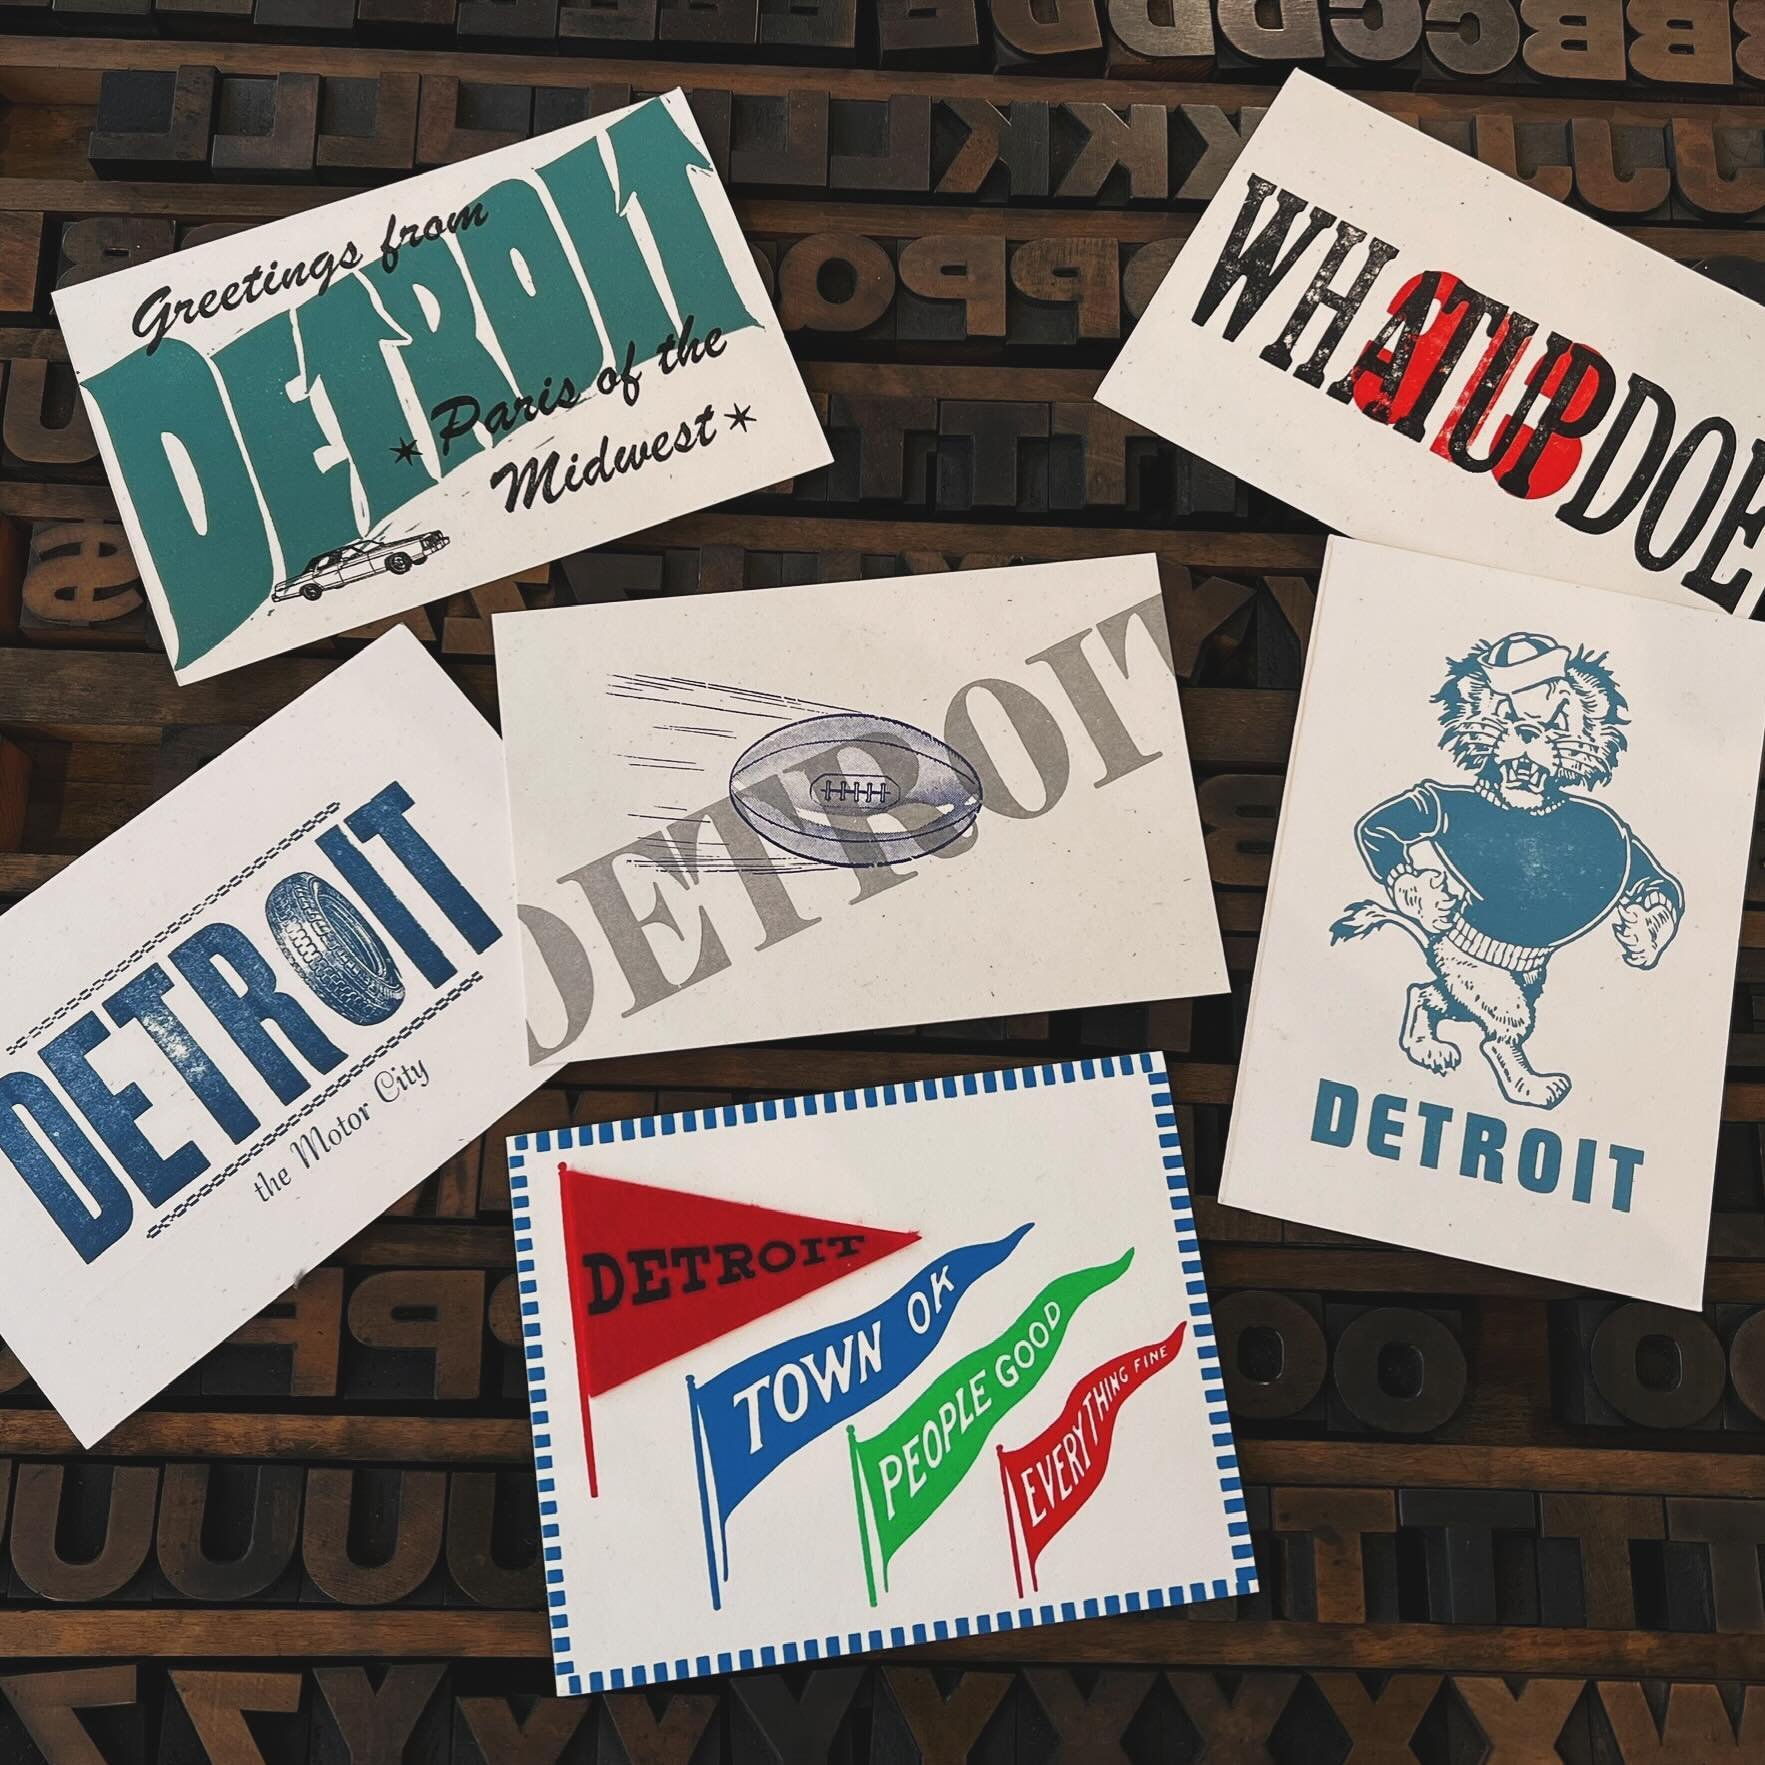 Visiting Detroit?! Send a postcard to someone letting them know all about your adventures! We are open this weekend while all the 🏈 NFL Draft activities are happening. To celebrate get a ✨FREE✨ Detroit football postcard tomorrow in-store. 
&bull;
&b